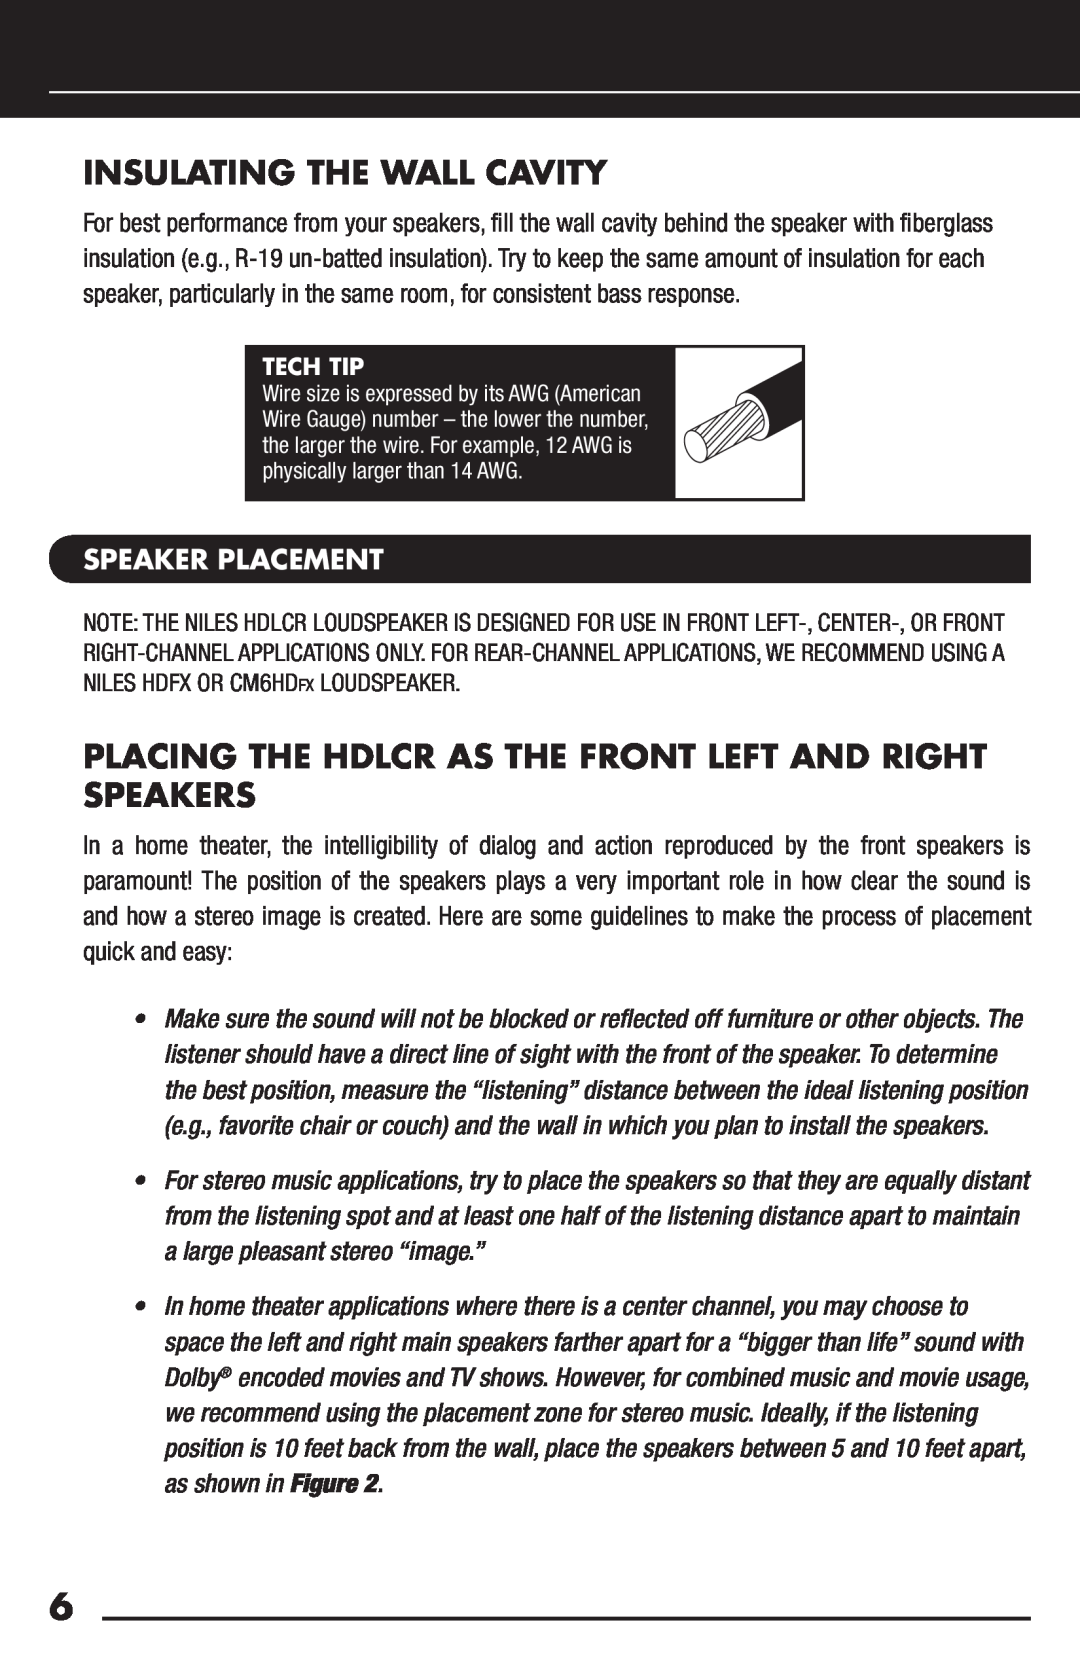 Niles Audio HDLCR manual Insulating The Wall Cavity, Speaker Placement, Tech Tip 